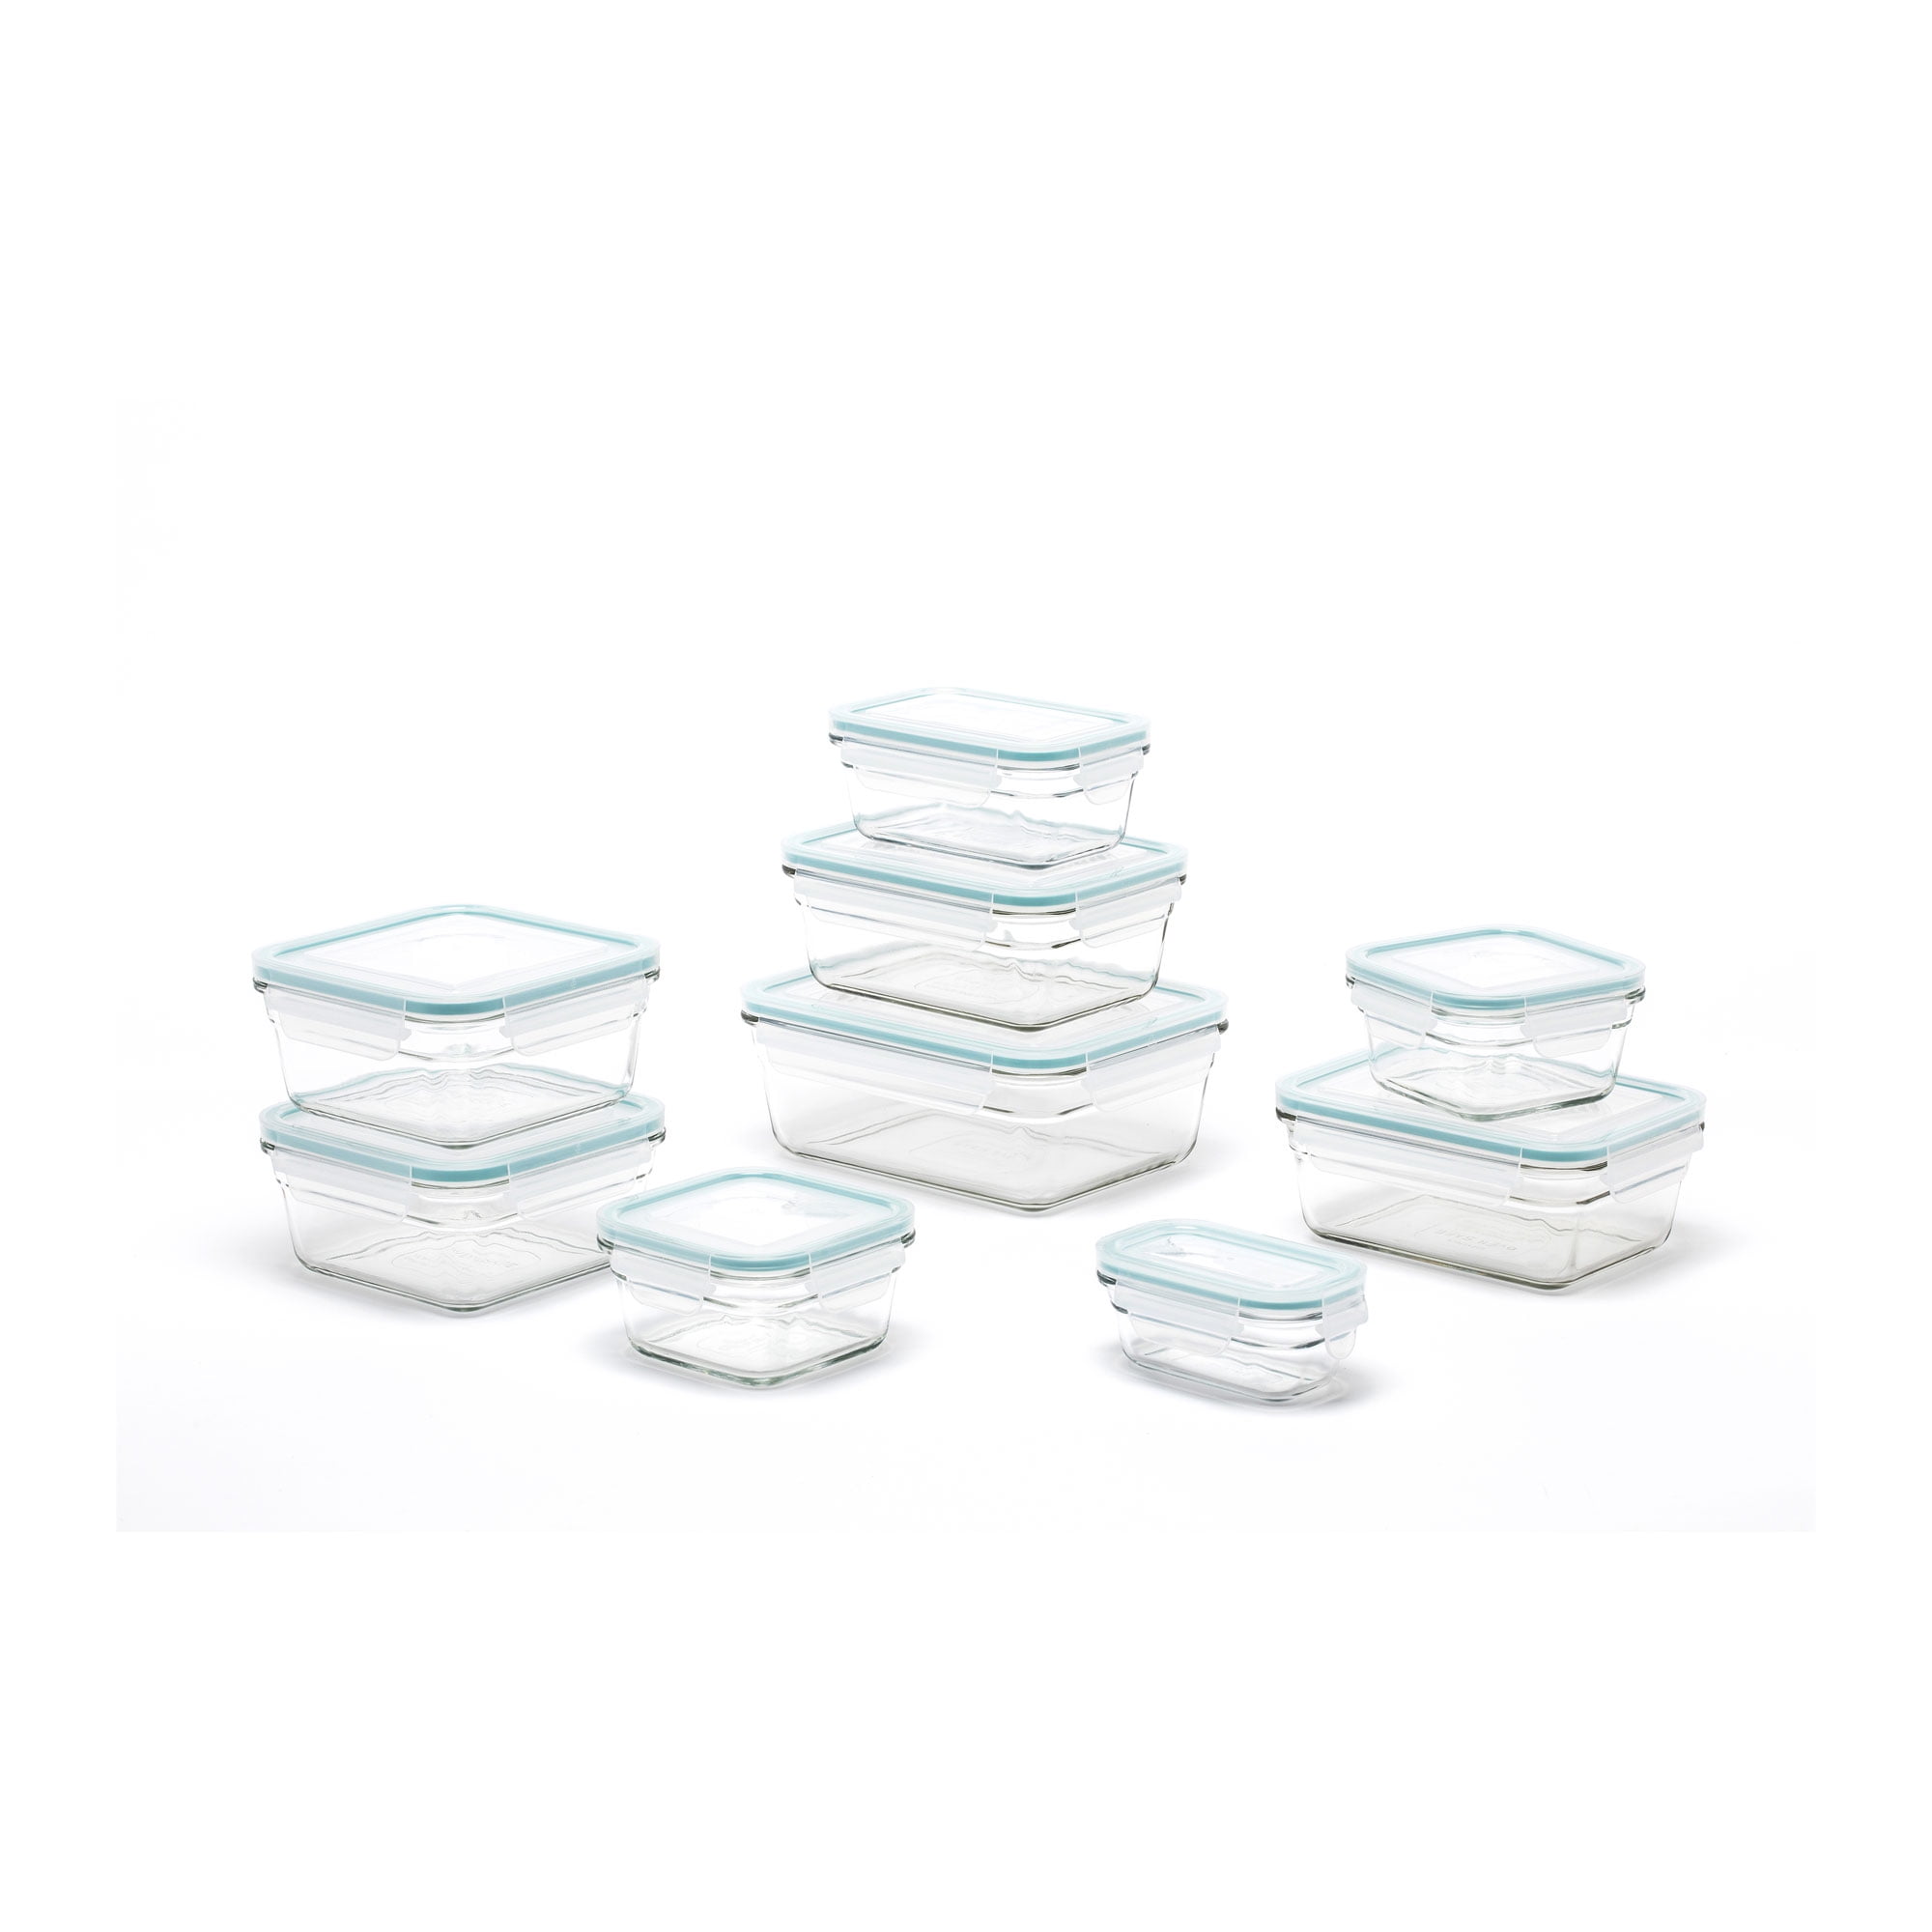 Glass Food Storage Containers with Lids Airtight Microwave Safe, Set of18  Piece